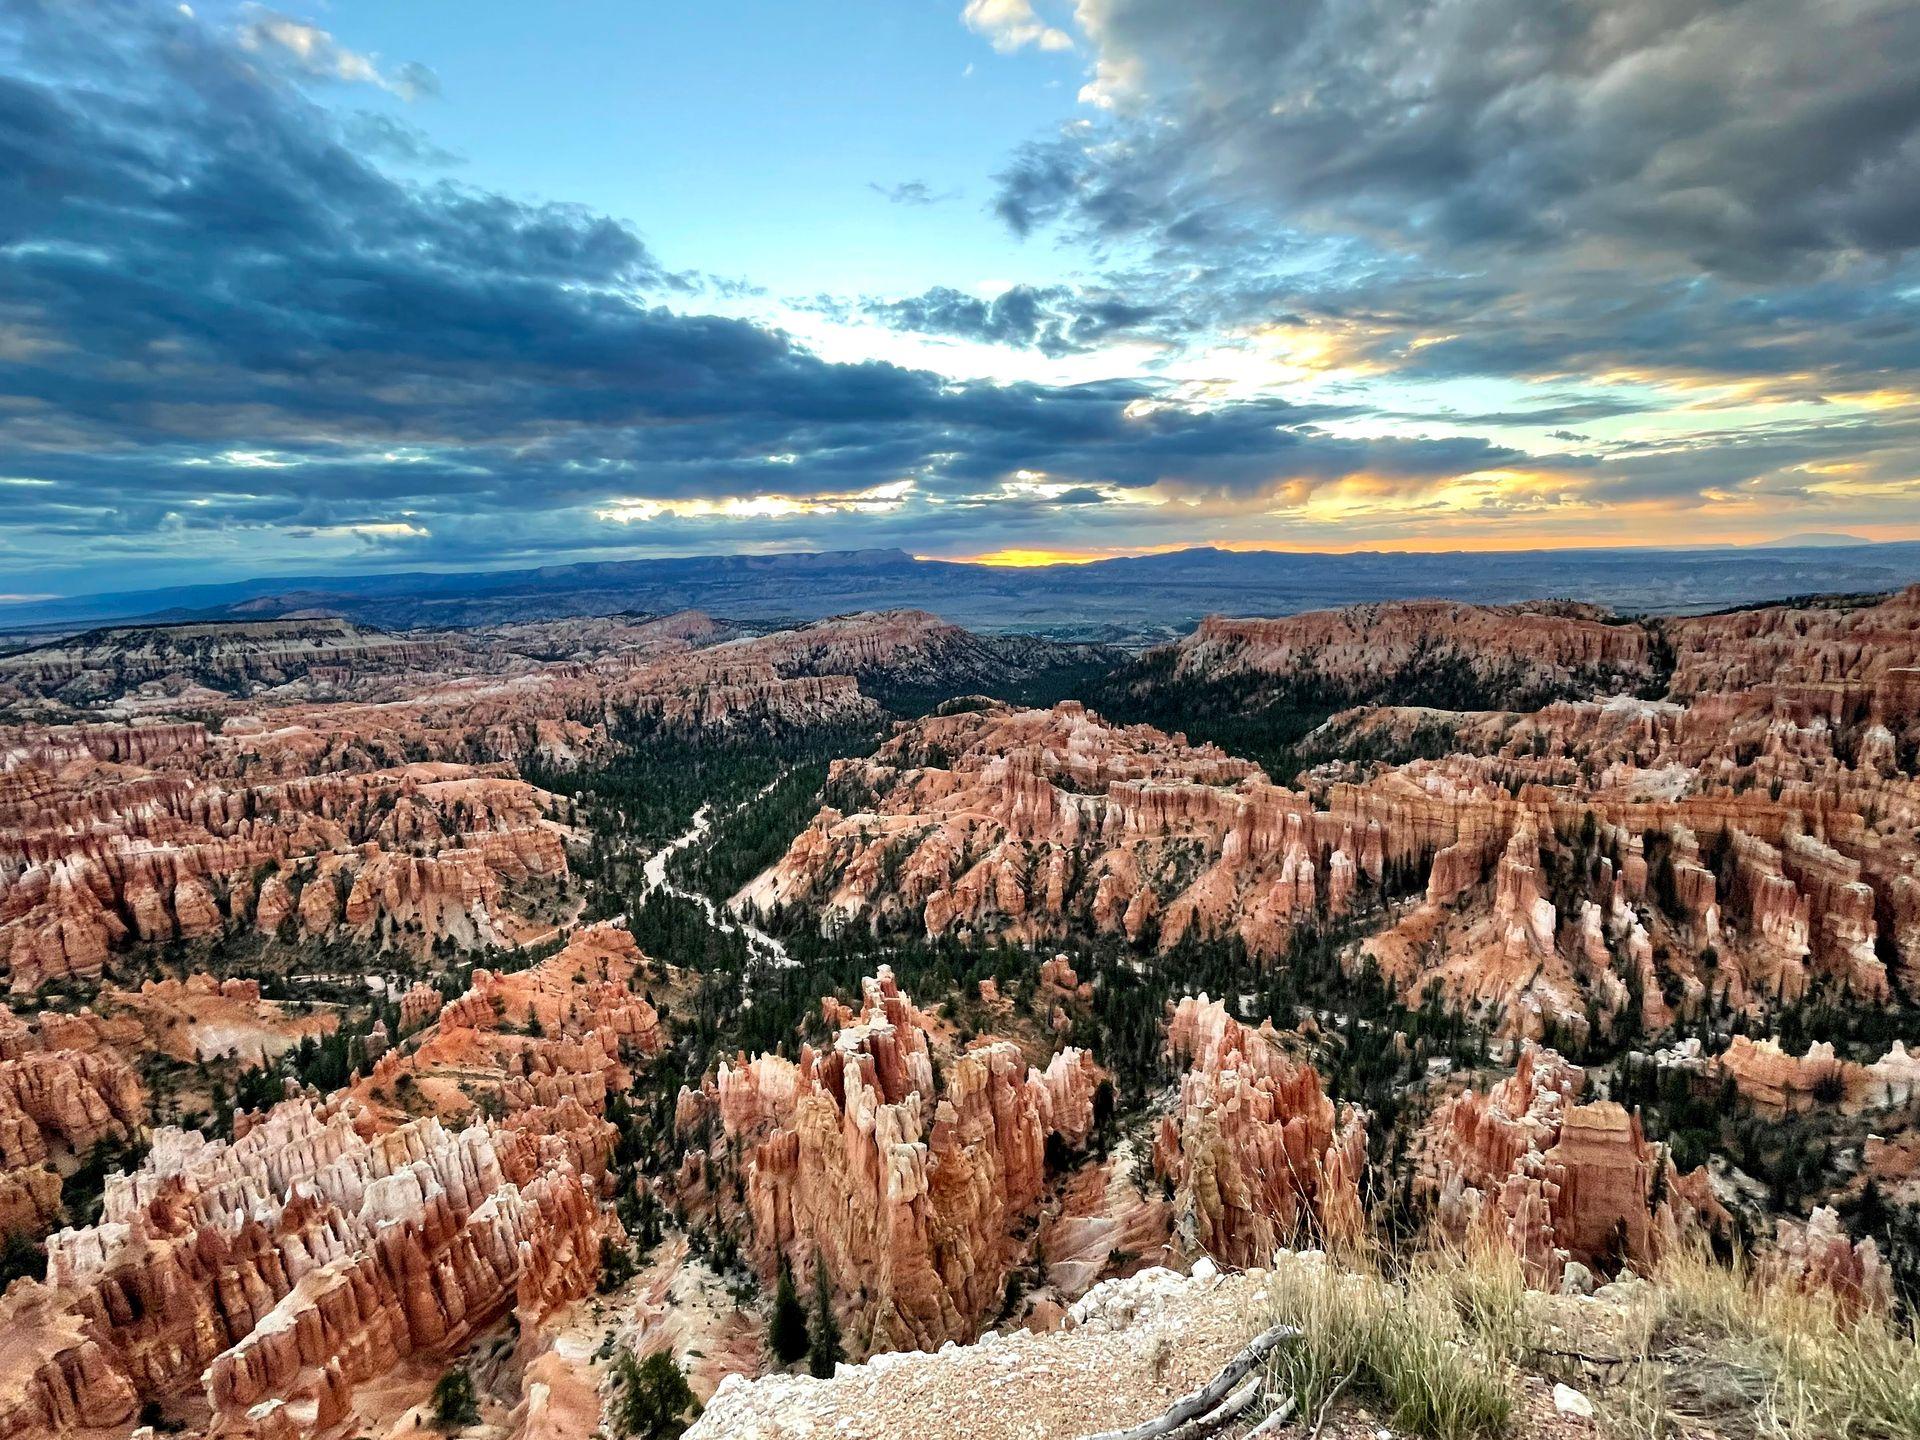 An overlook of Bryce Canyon National Park at sunrise. There are many orange hoodoos and a few areas of green trees.